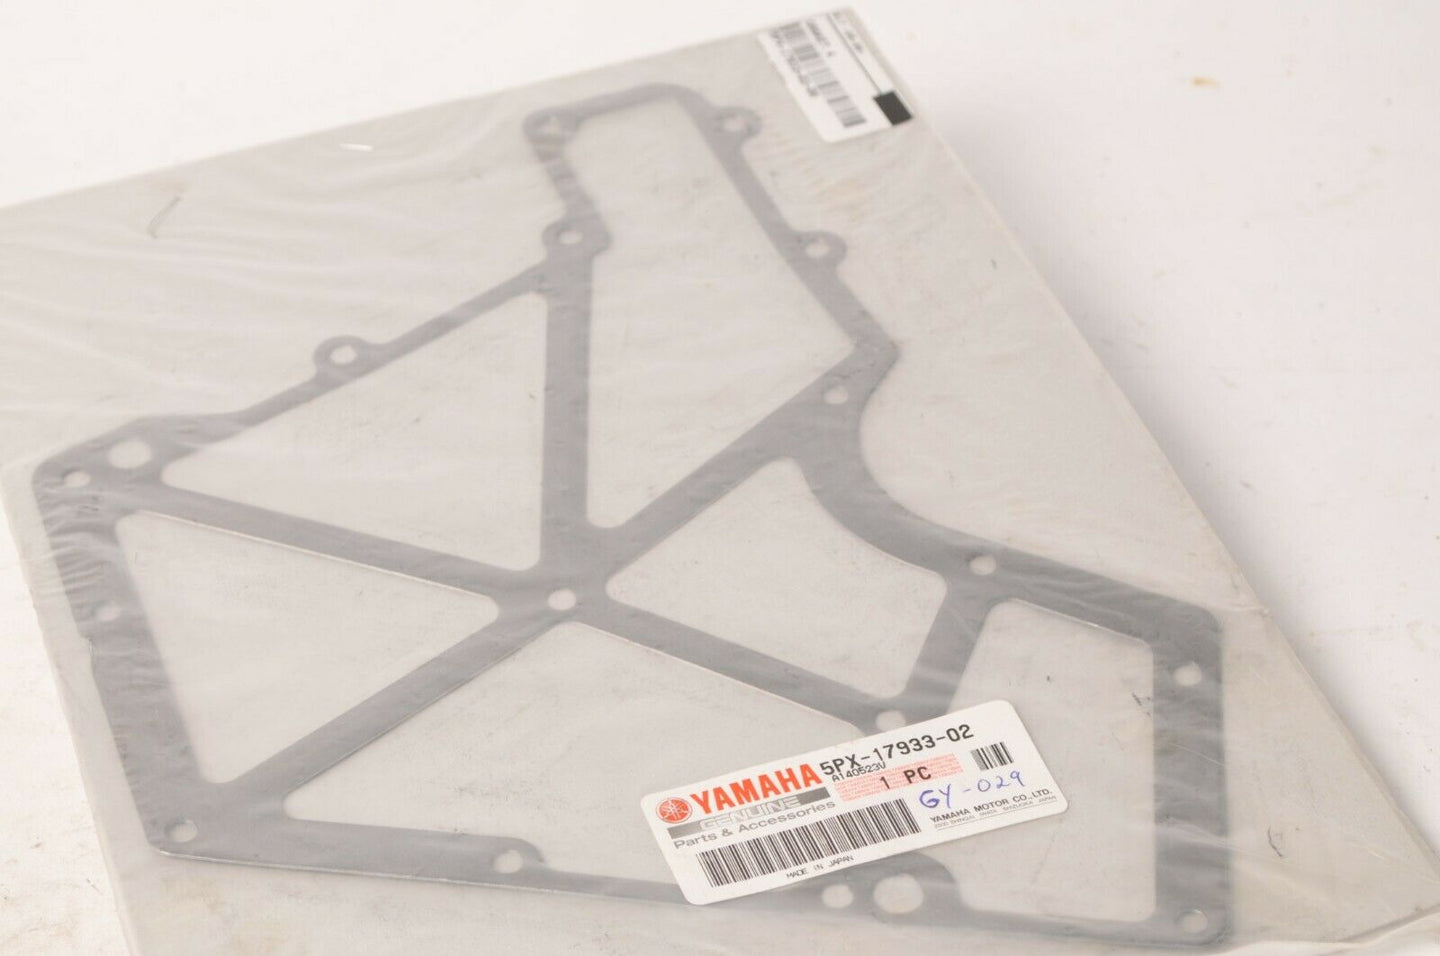 Genuine Yamaha 5PX-17933-02 Gasket 4,Middle Drive Gear - Road Star XV17 2002-09